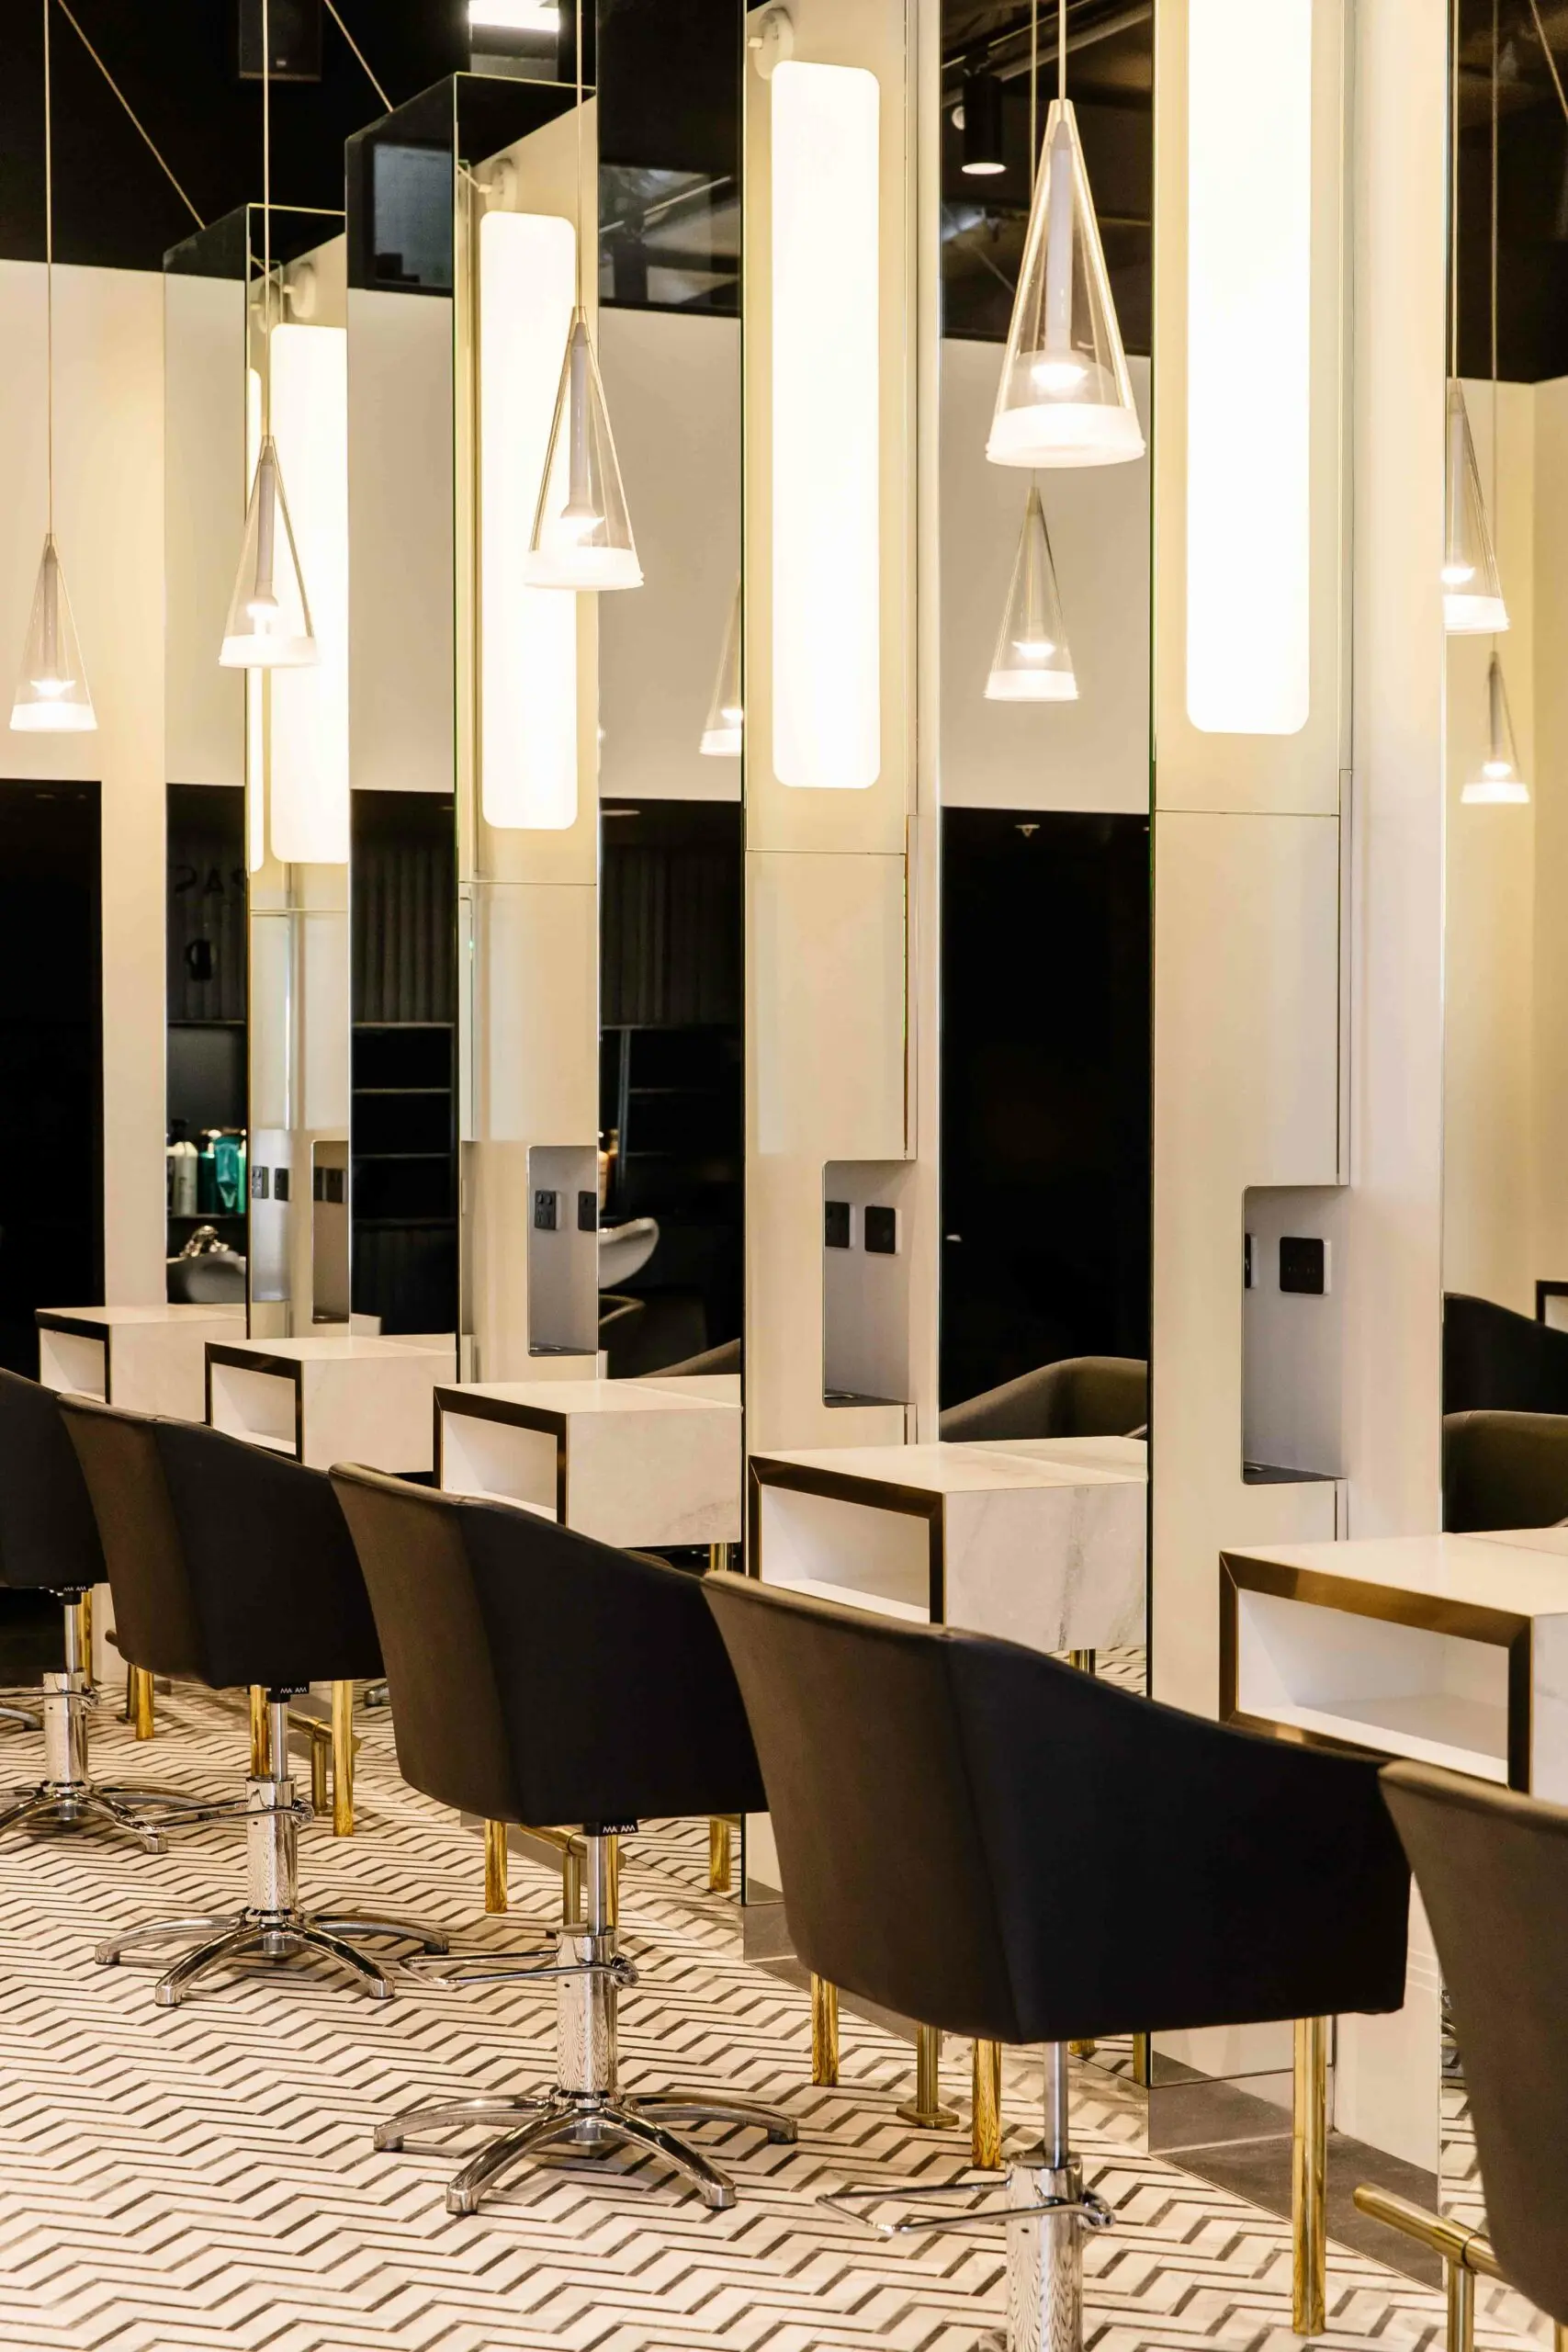 Co and Pace Salons, Brisbane Hairdresser, Brisbane Hair, Hairdresser, Hair Stylist, Brisbane Salon